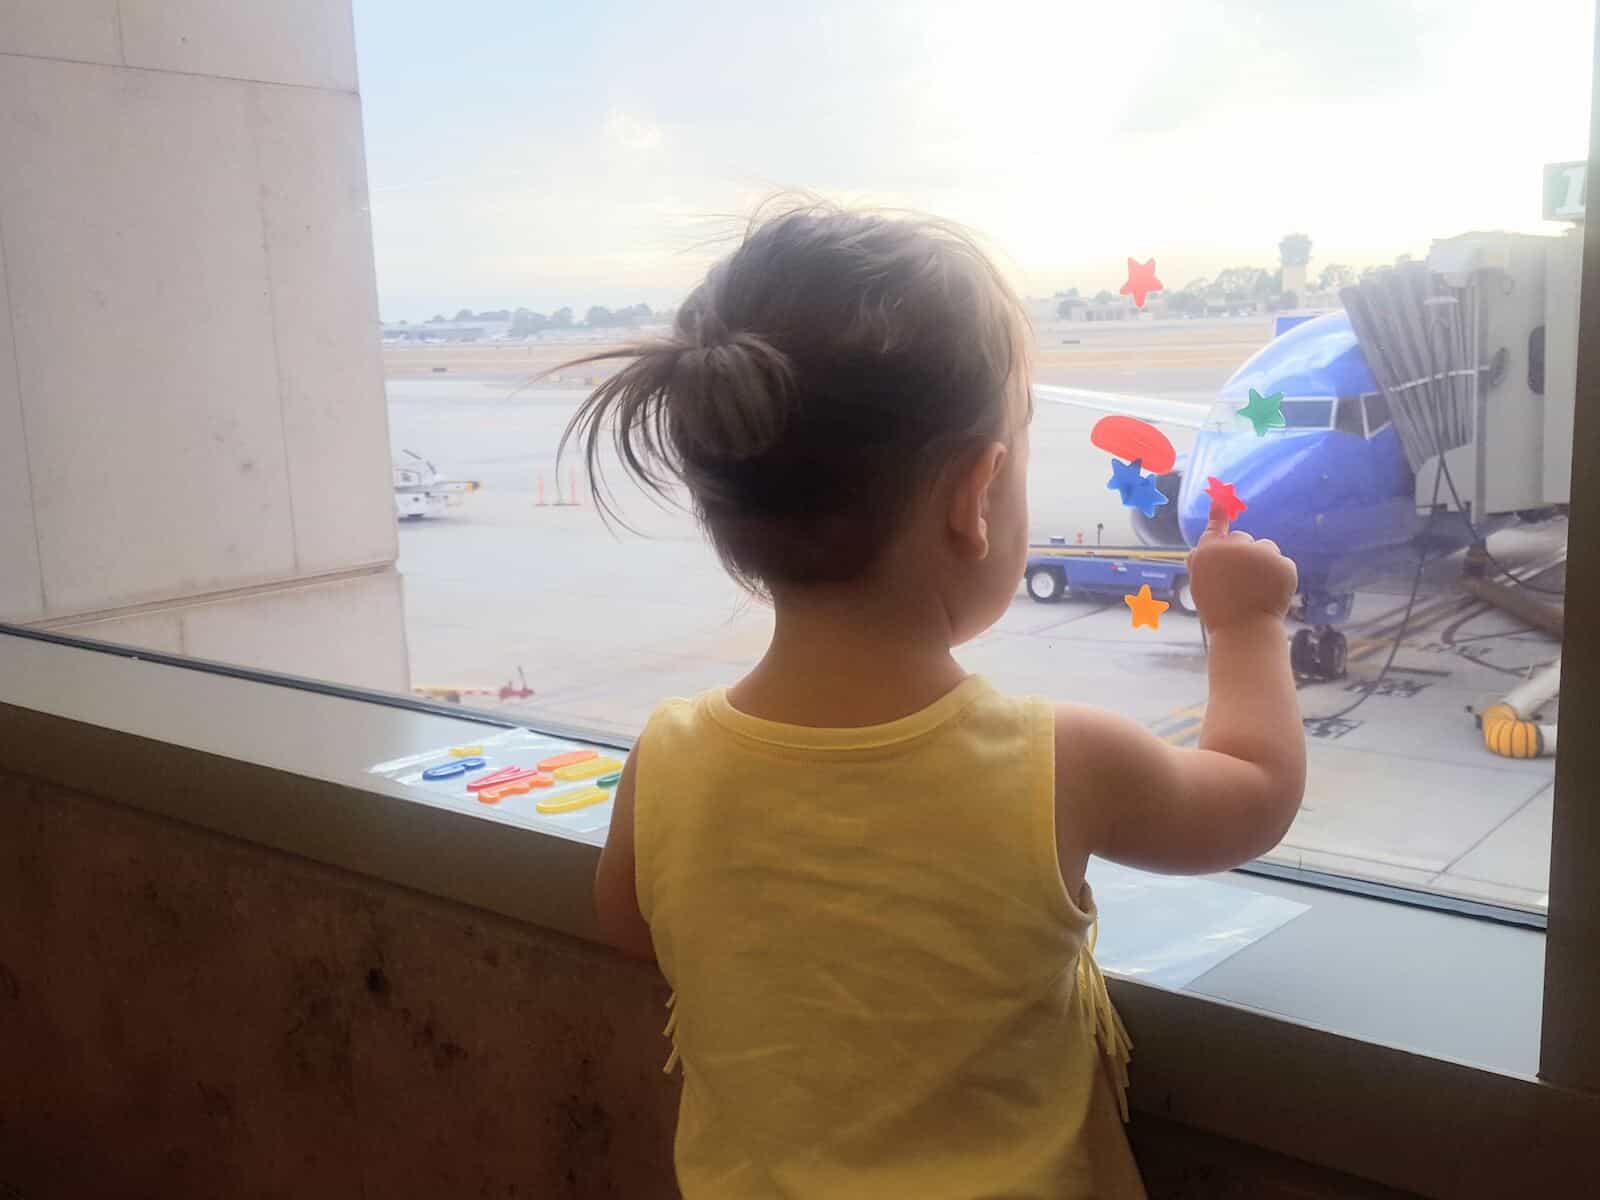 Toddler girl looks out of window at airport.